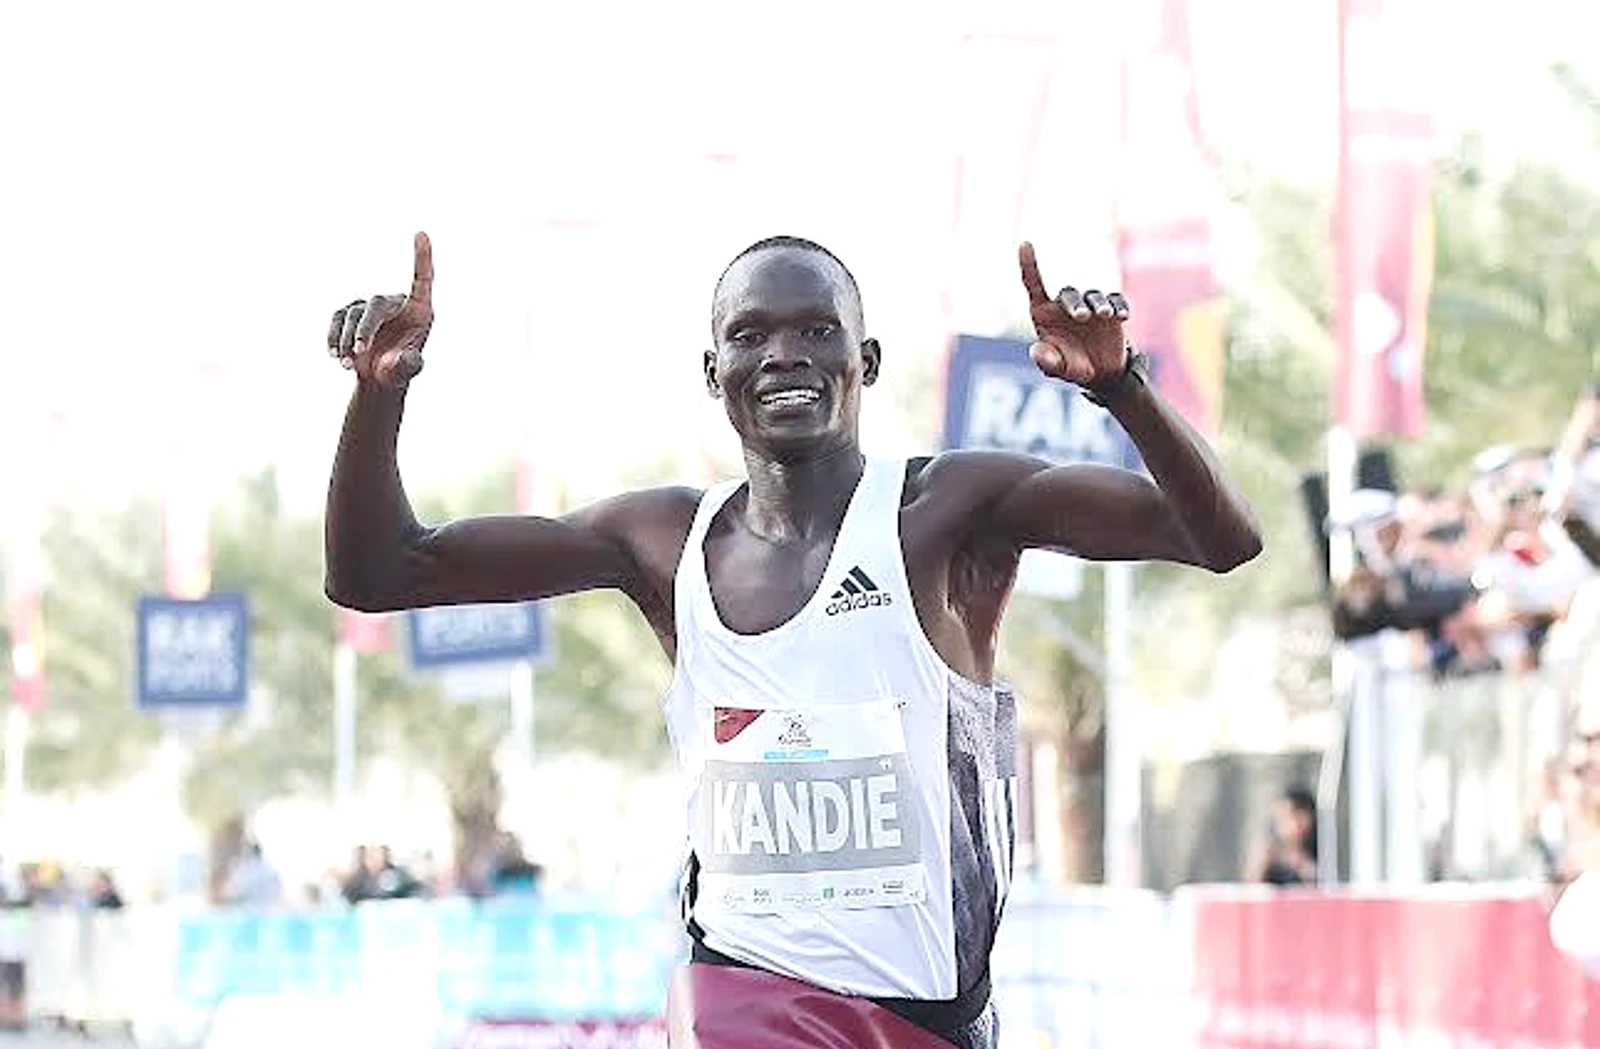 Kibiwott Kandie ready to compete at the Peachtree Road Race 2022